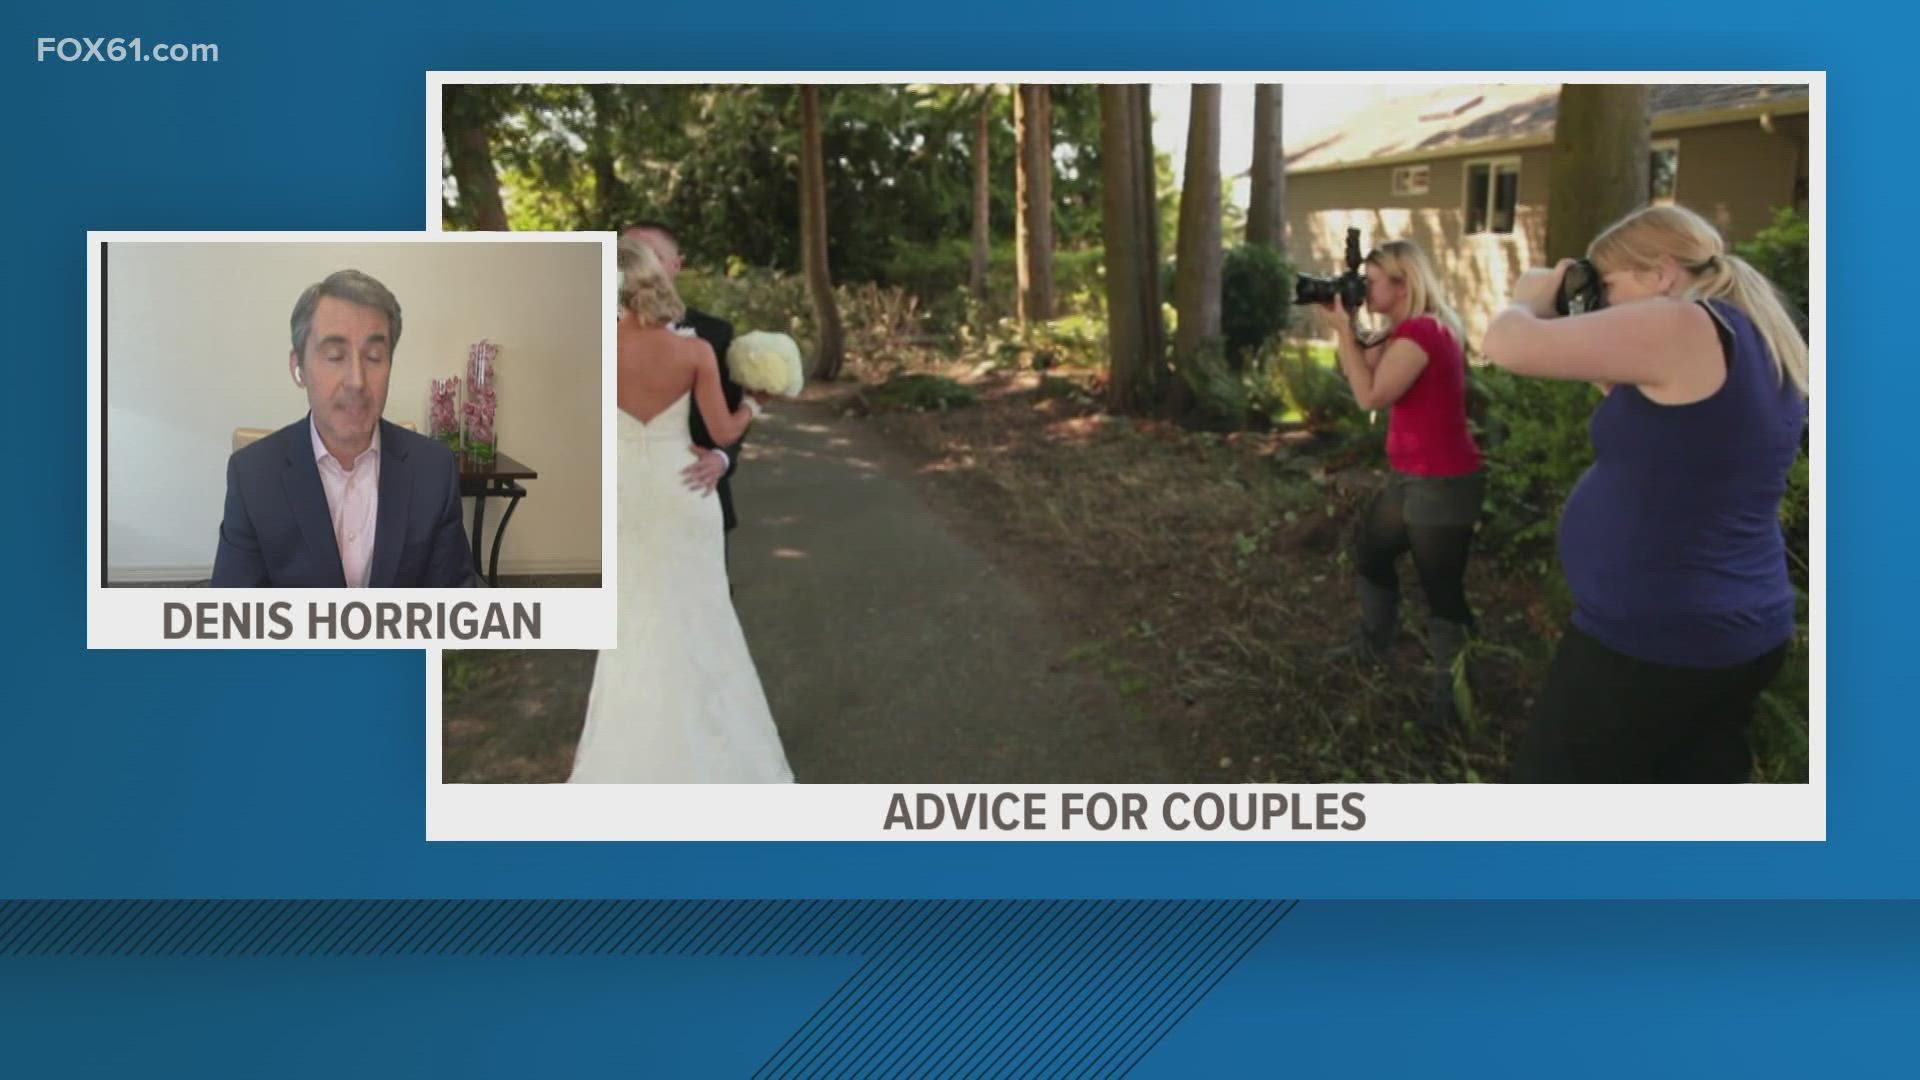 Denis Horrigan, partner & co-founder of Connecticut Wealth Management, provides some advice for newly engaged couples.